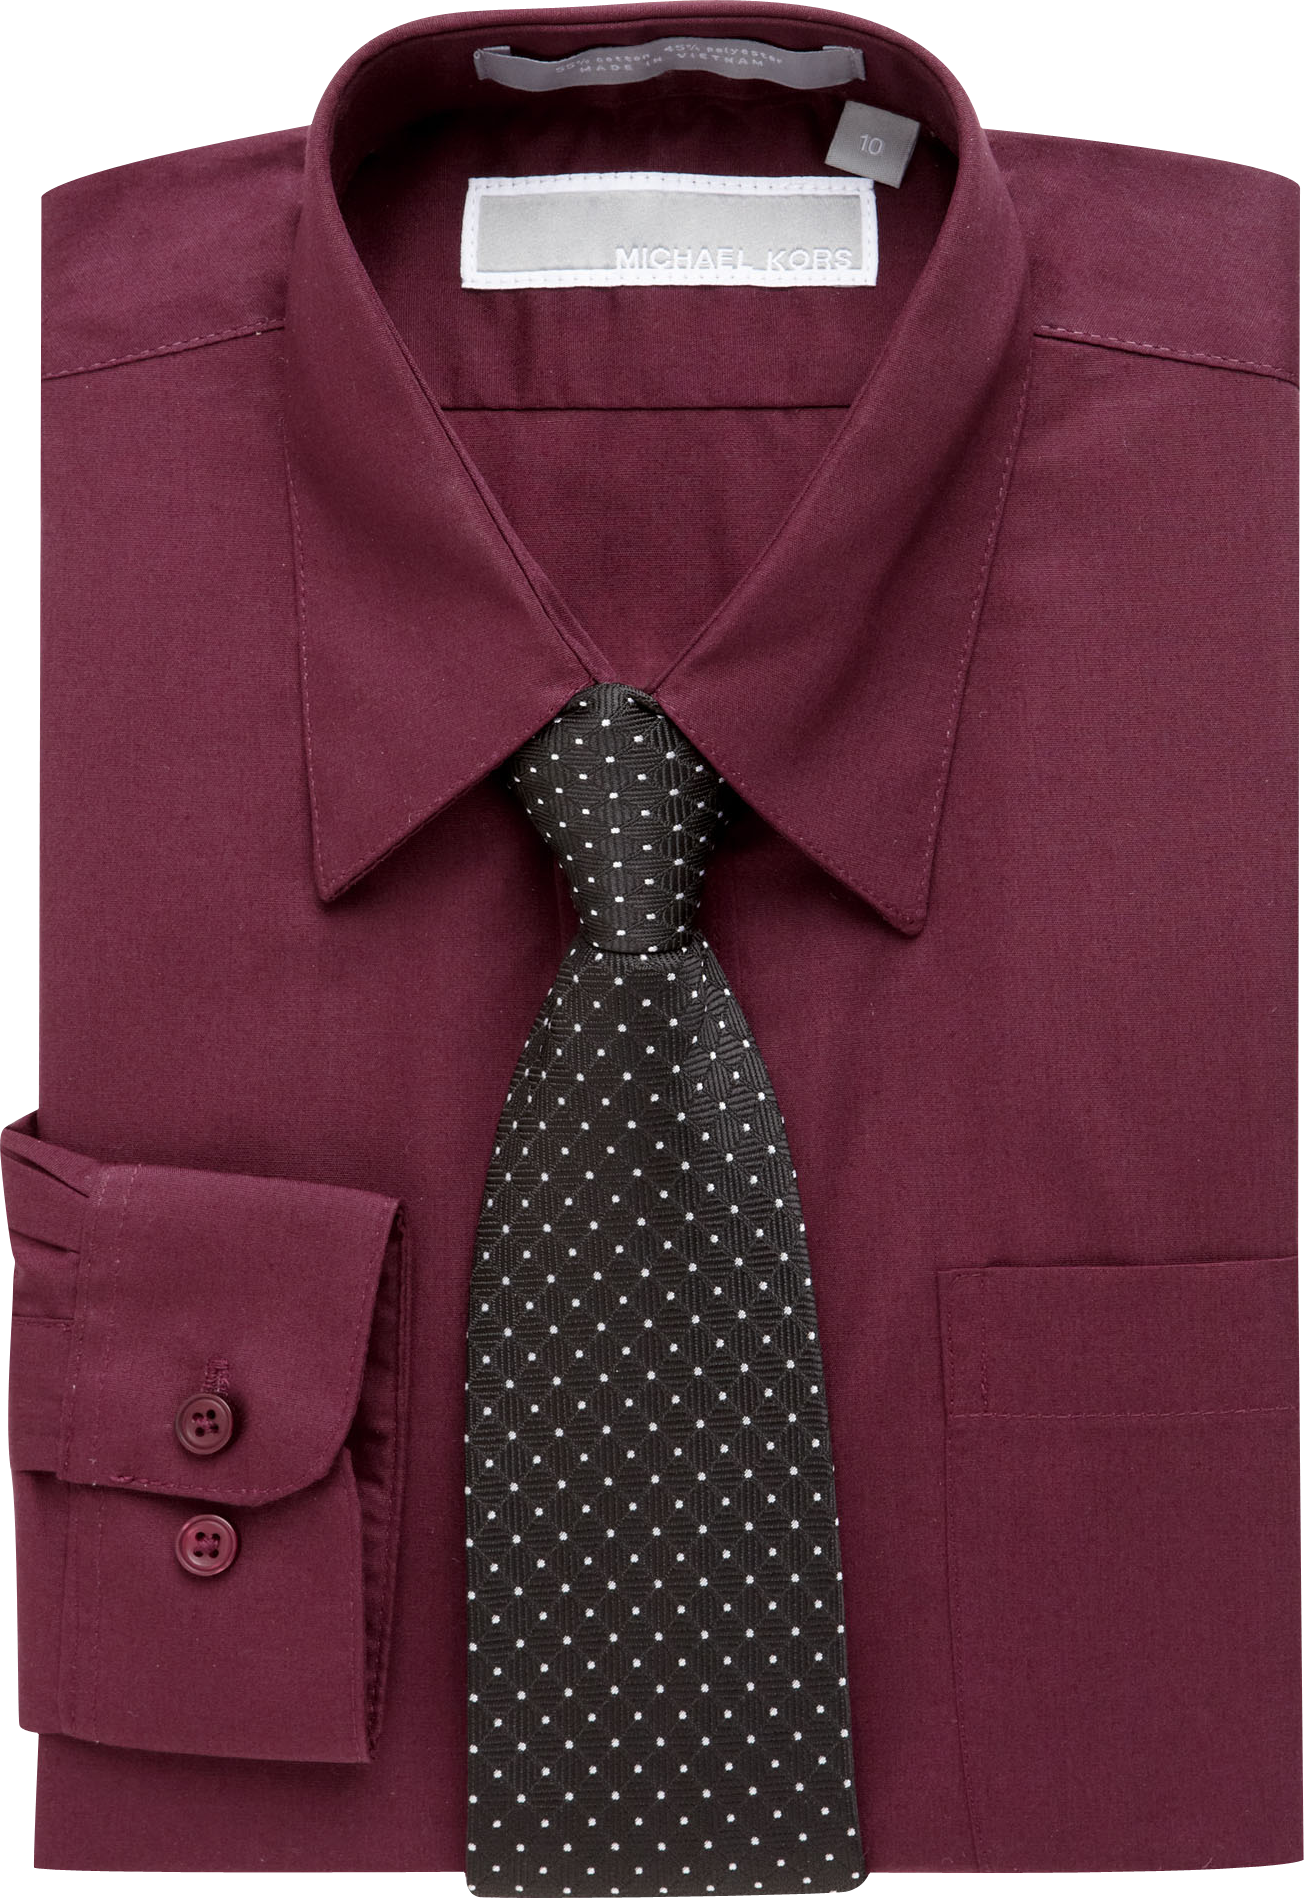 michael kors the shirt and tie collection